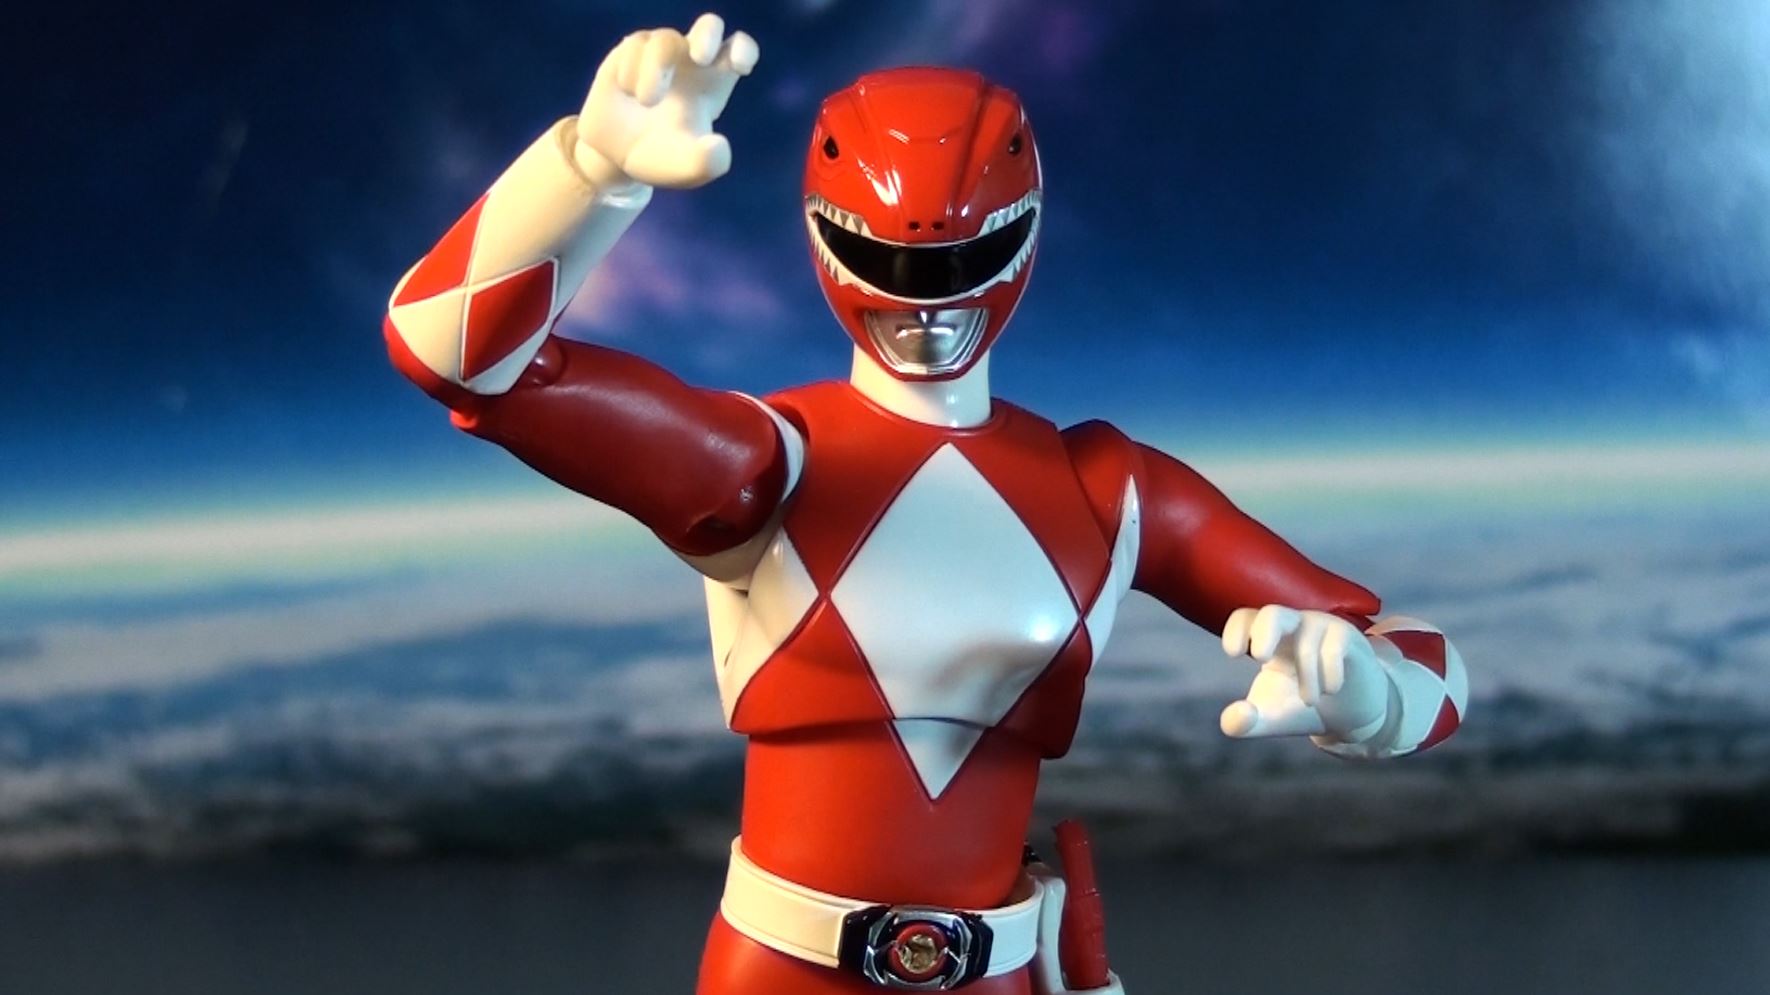 The Mighty Morphin Power Rangers Red Ranger comes to the US. 